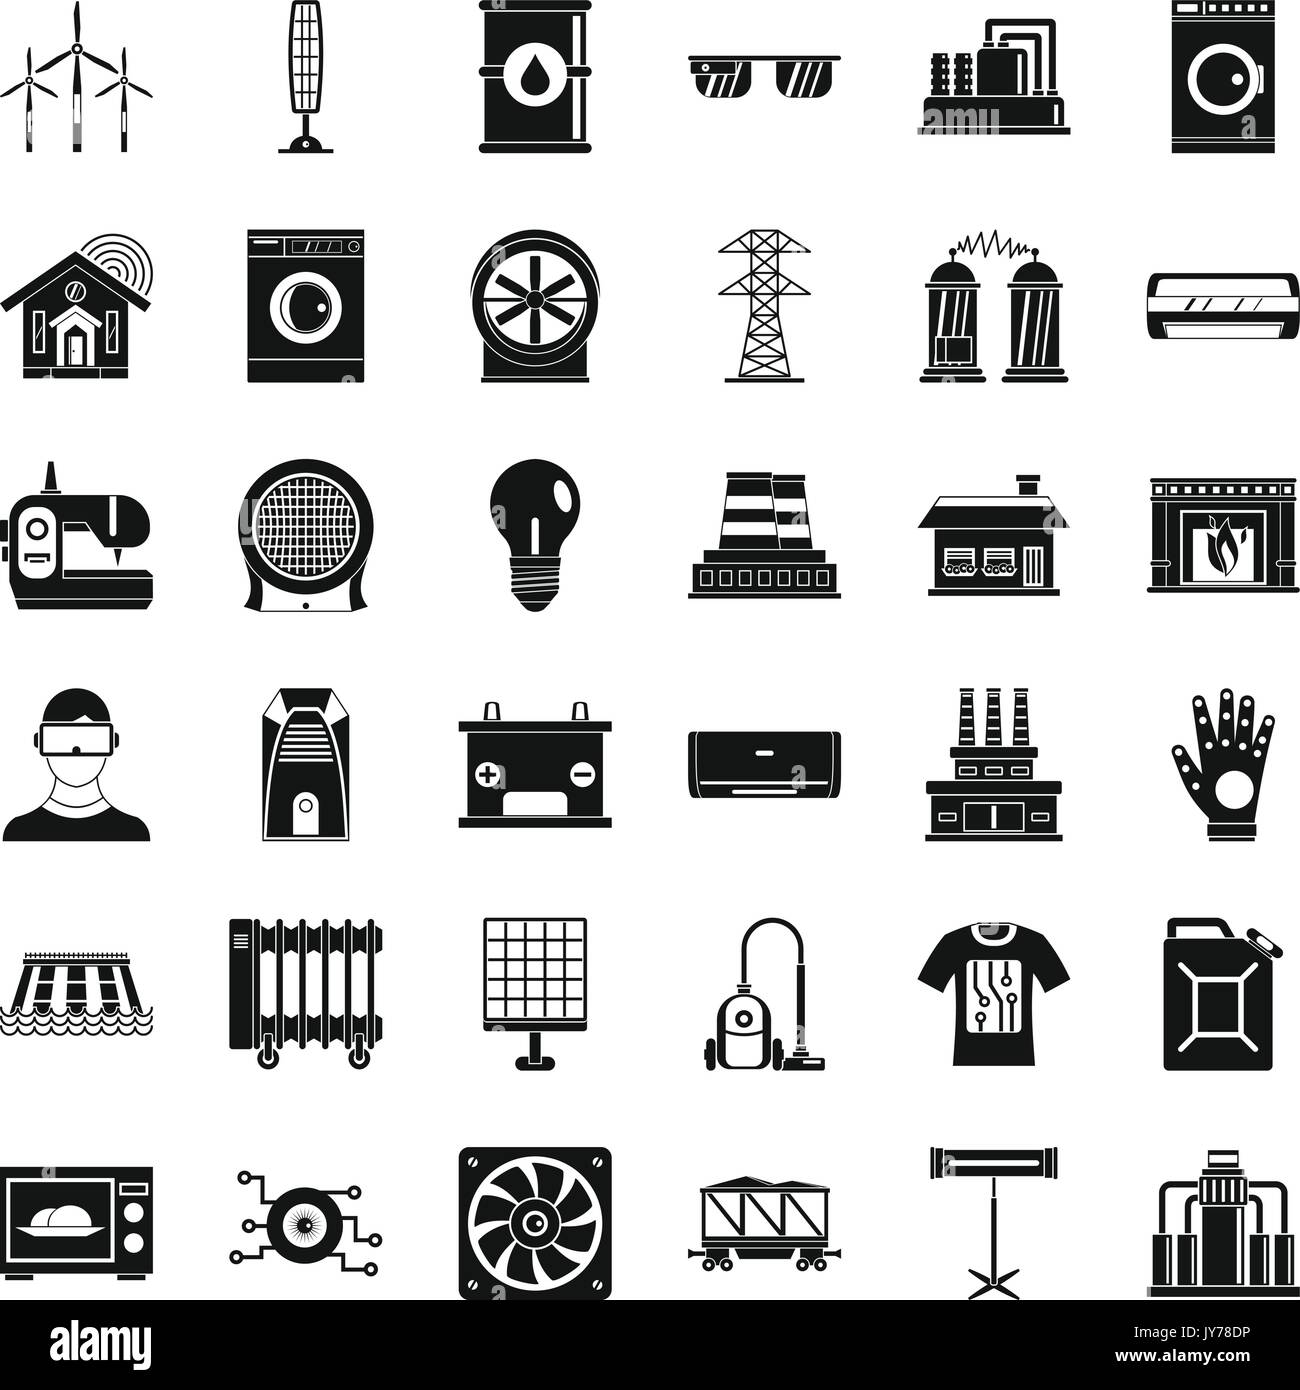 Electrical equipment icons set, simple style Stock Vector